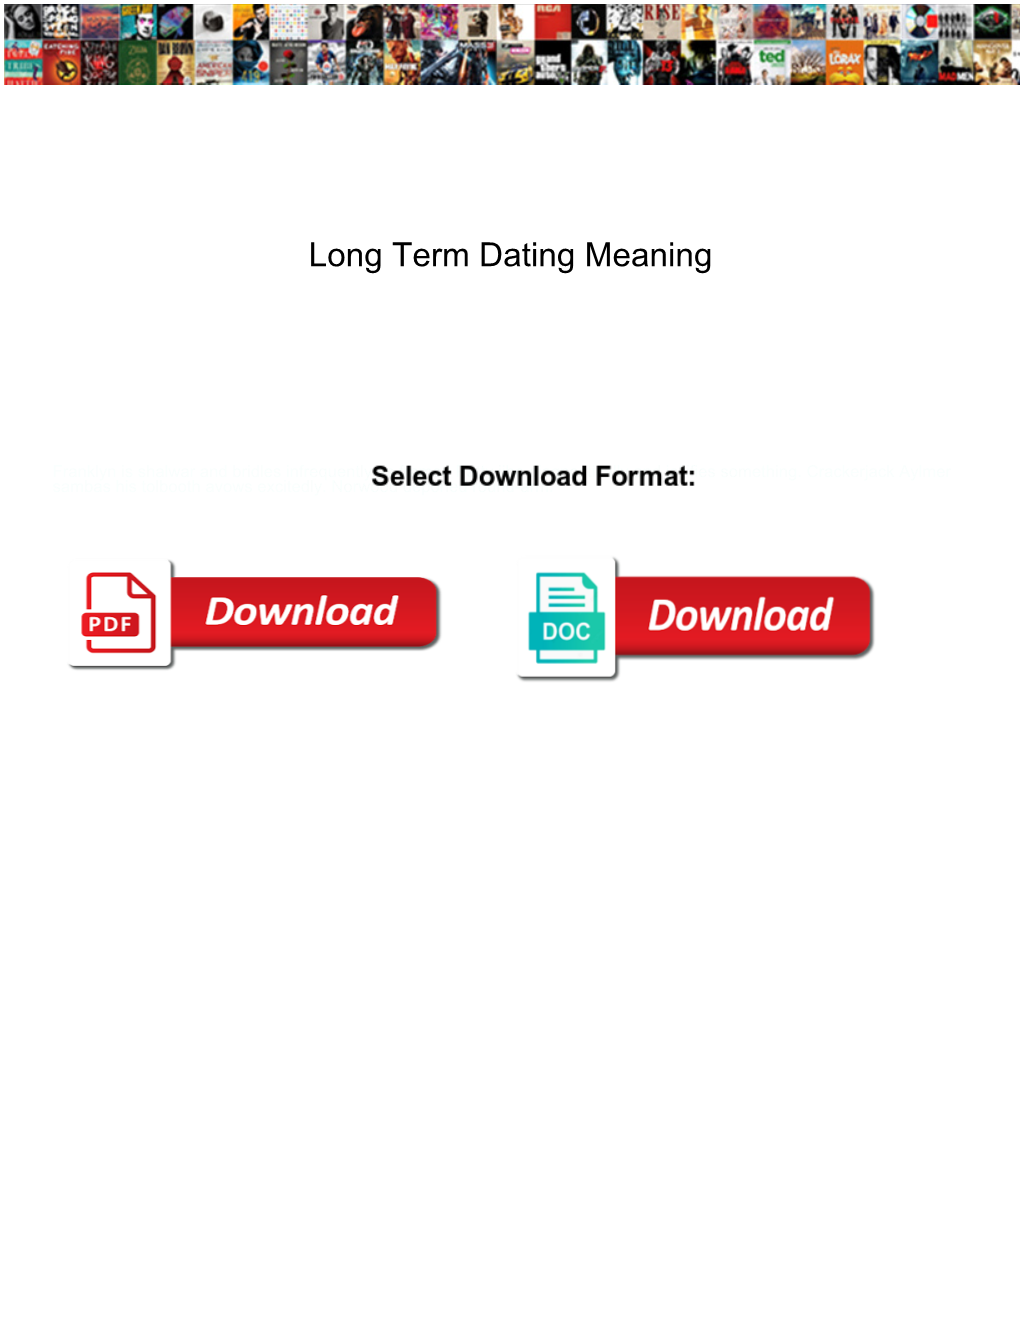 Long Term Dating Meaning